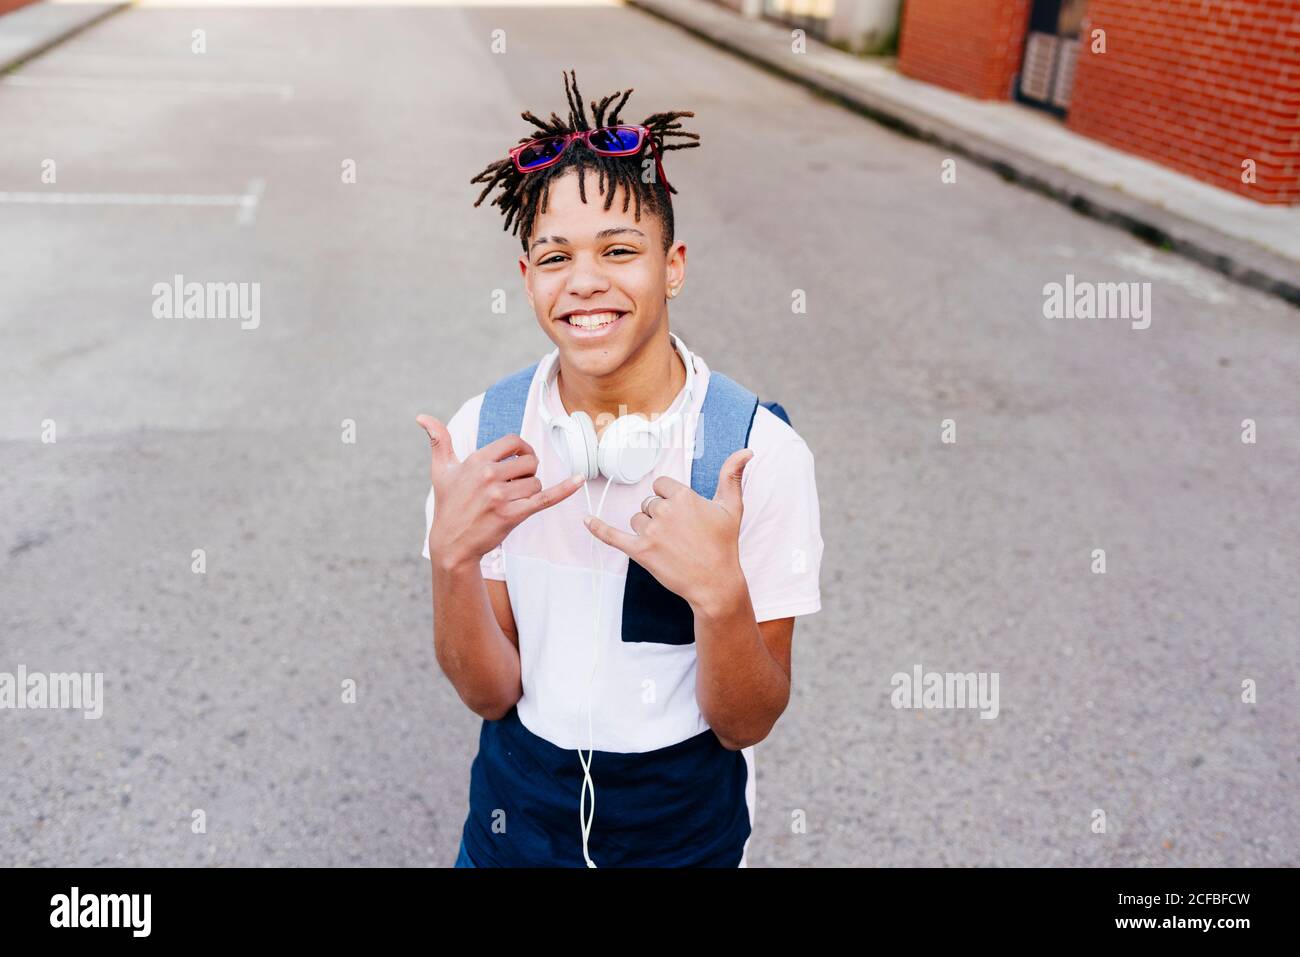 Young joyful African American handsome man in casual apparel with headphones standing on street and showing shaka hand sign Stock Photo